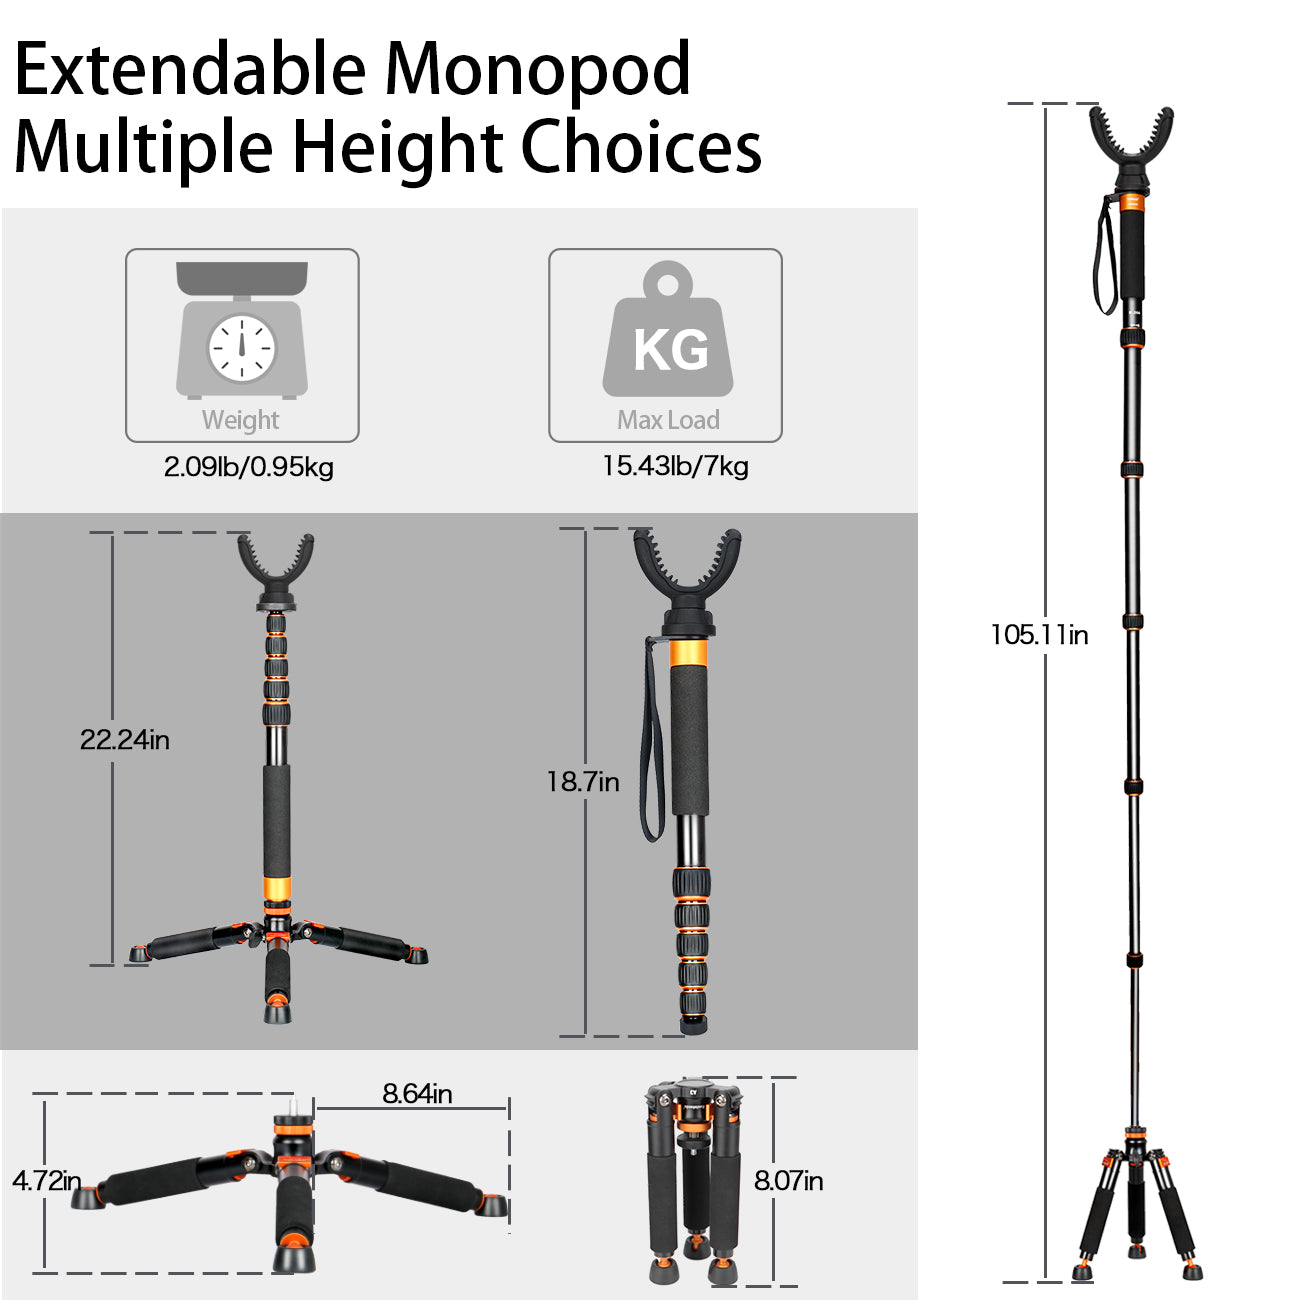 Koolehaoda Shooting Stick Monopod with Tripods Base and 360 Degree Rotate U Yoke Holder Gun Pod Rifle Rest, Adjustable Stick Height for Hunting, Shooting and Outdoors-(K-266+A3)